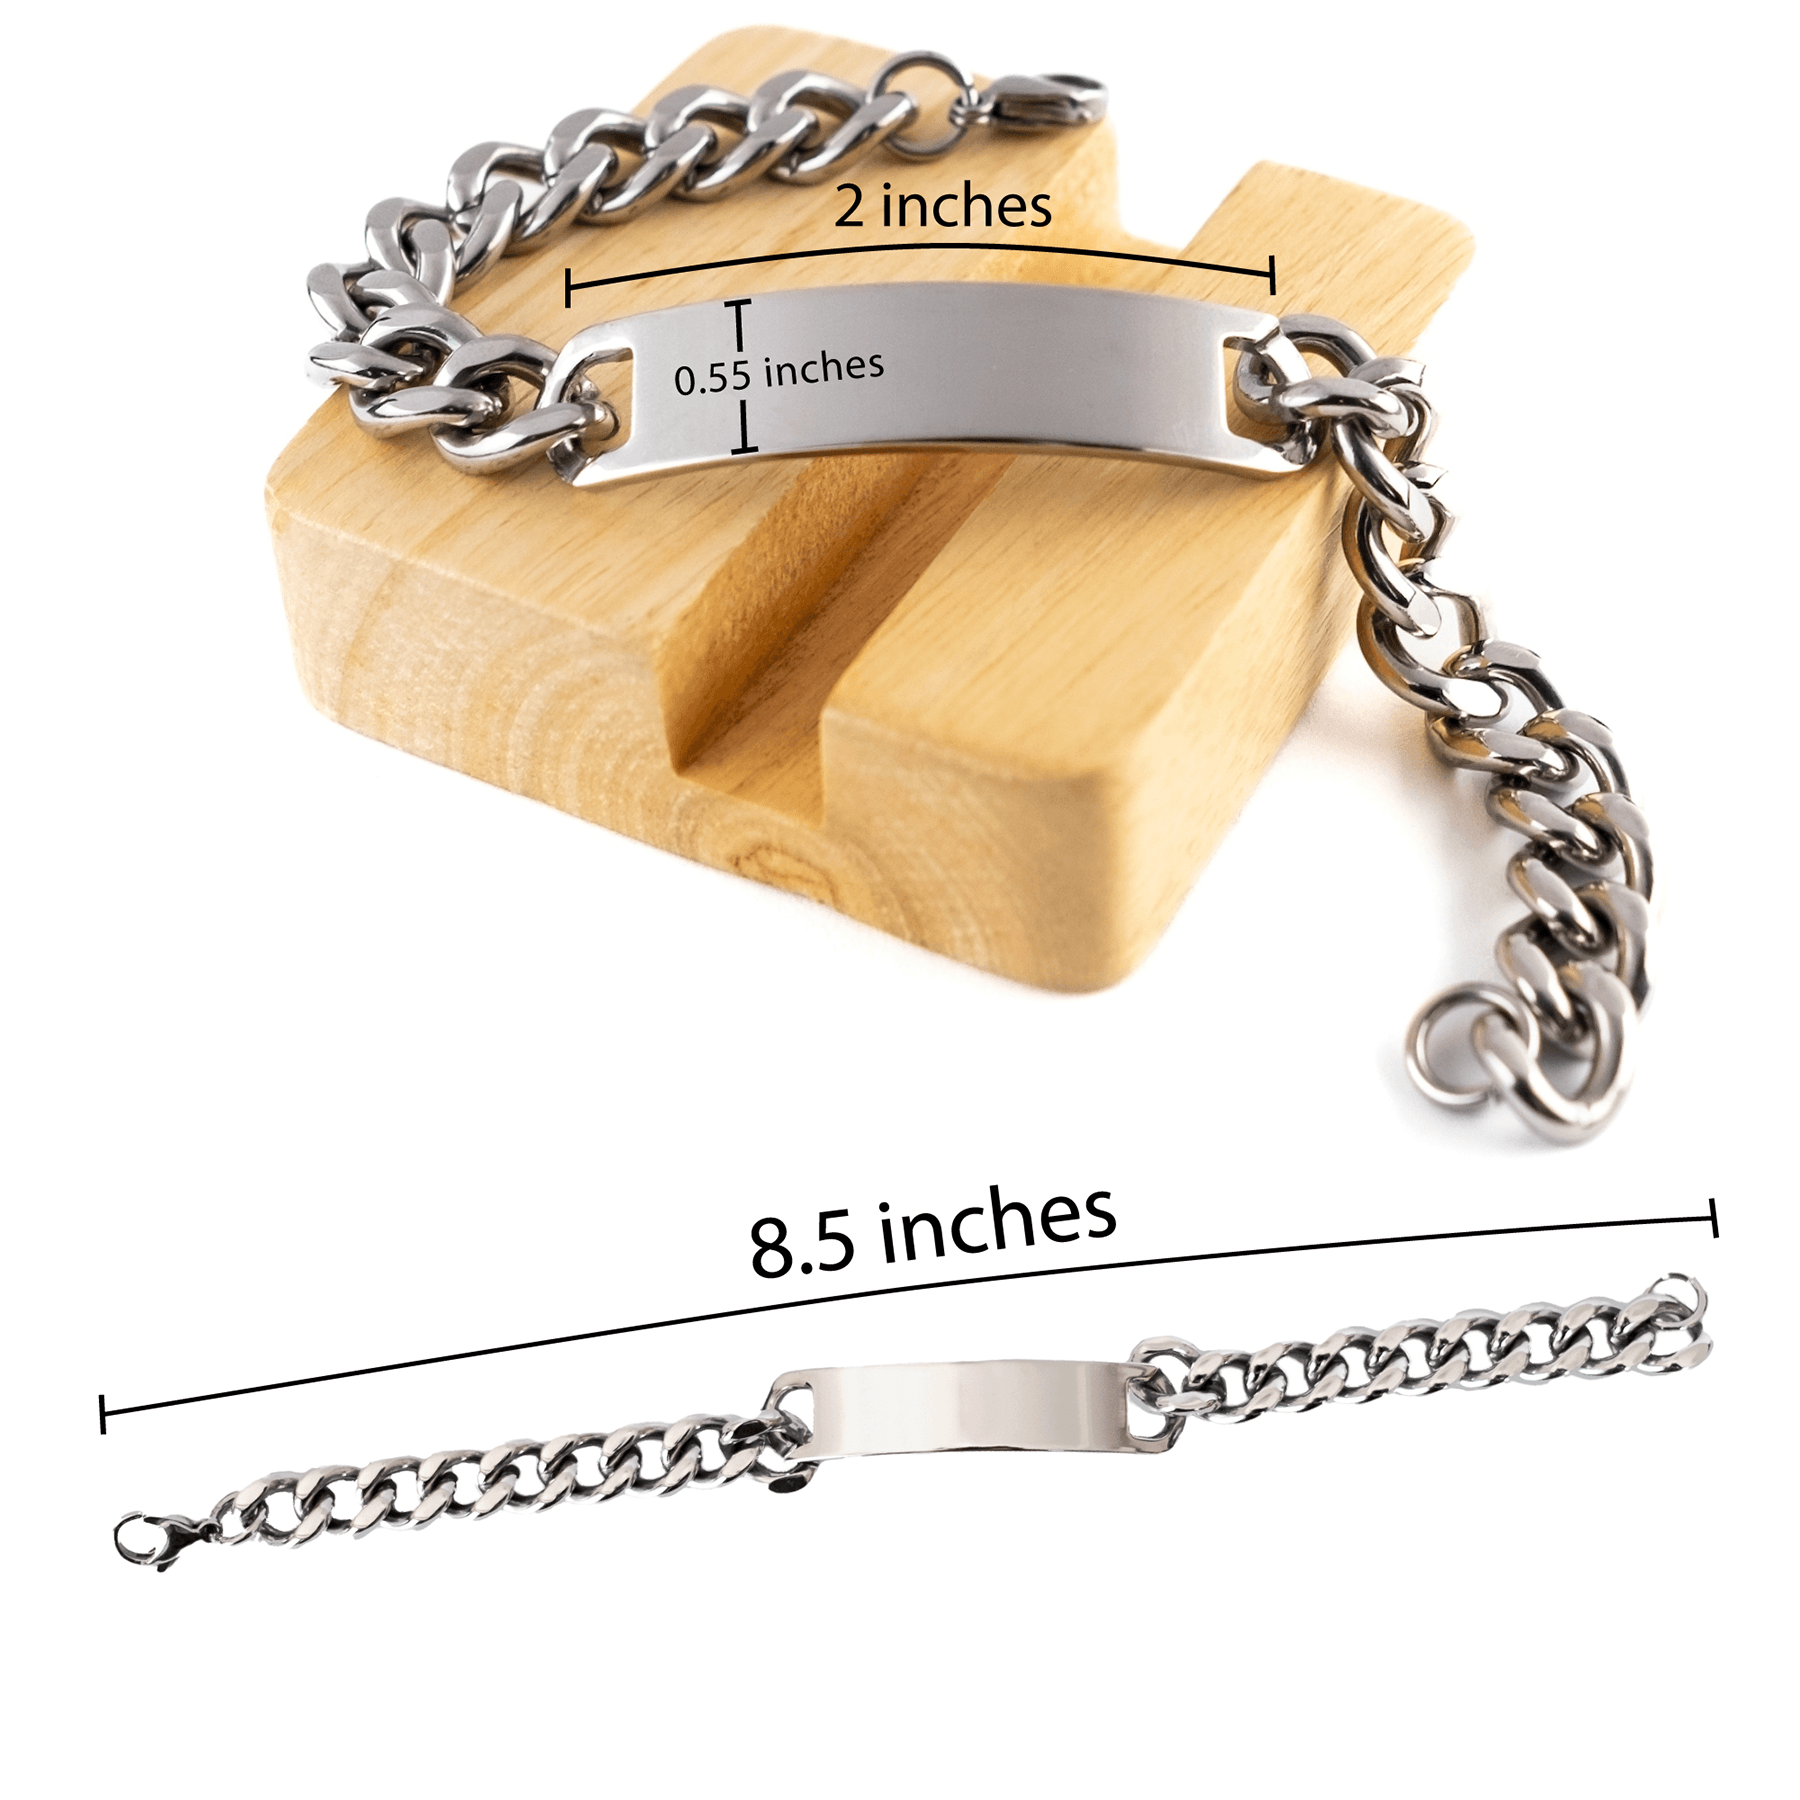 Sarcastic Barber Cuban Chain Stainless Steel Bracelet Gifts, Christmas Holiday Gifts for Barber Birthday, Barber: Because greatness is woven into the fabric of every day, Coworkers, Friends - Mallard Moon Gift Shop